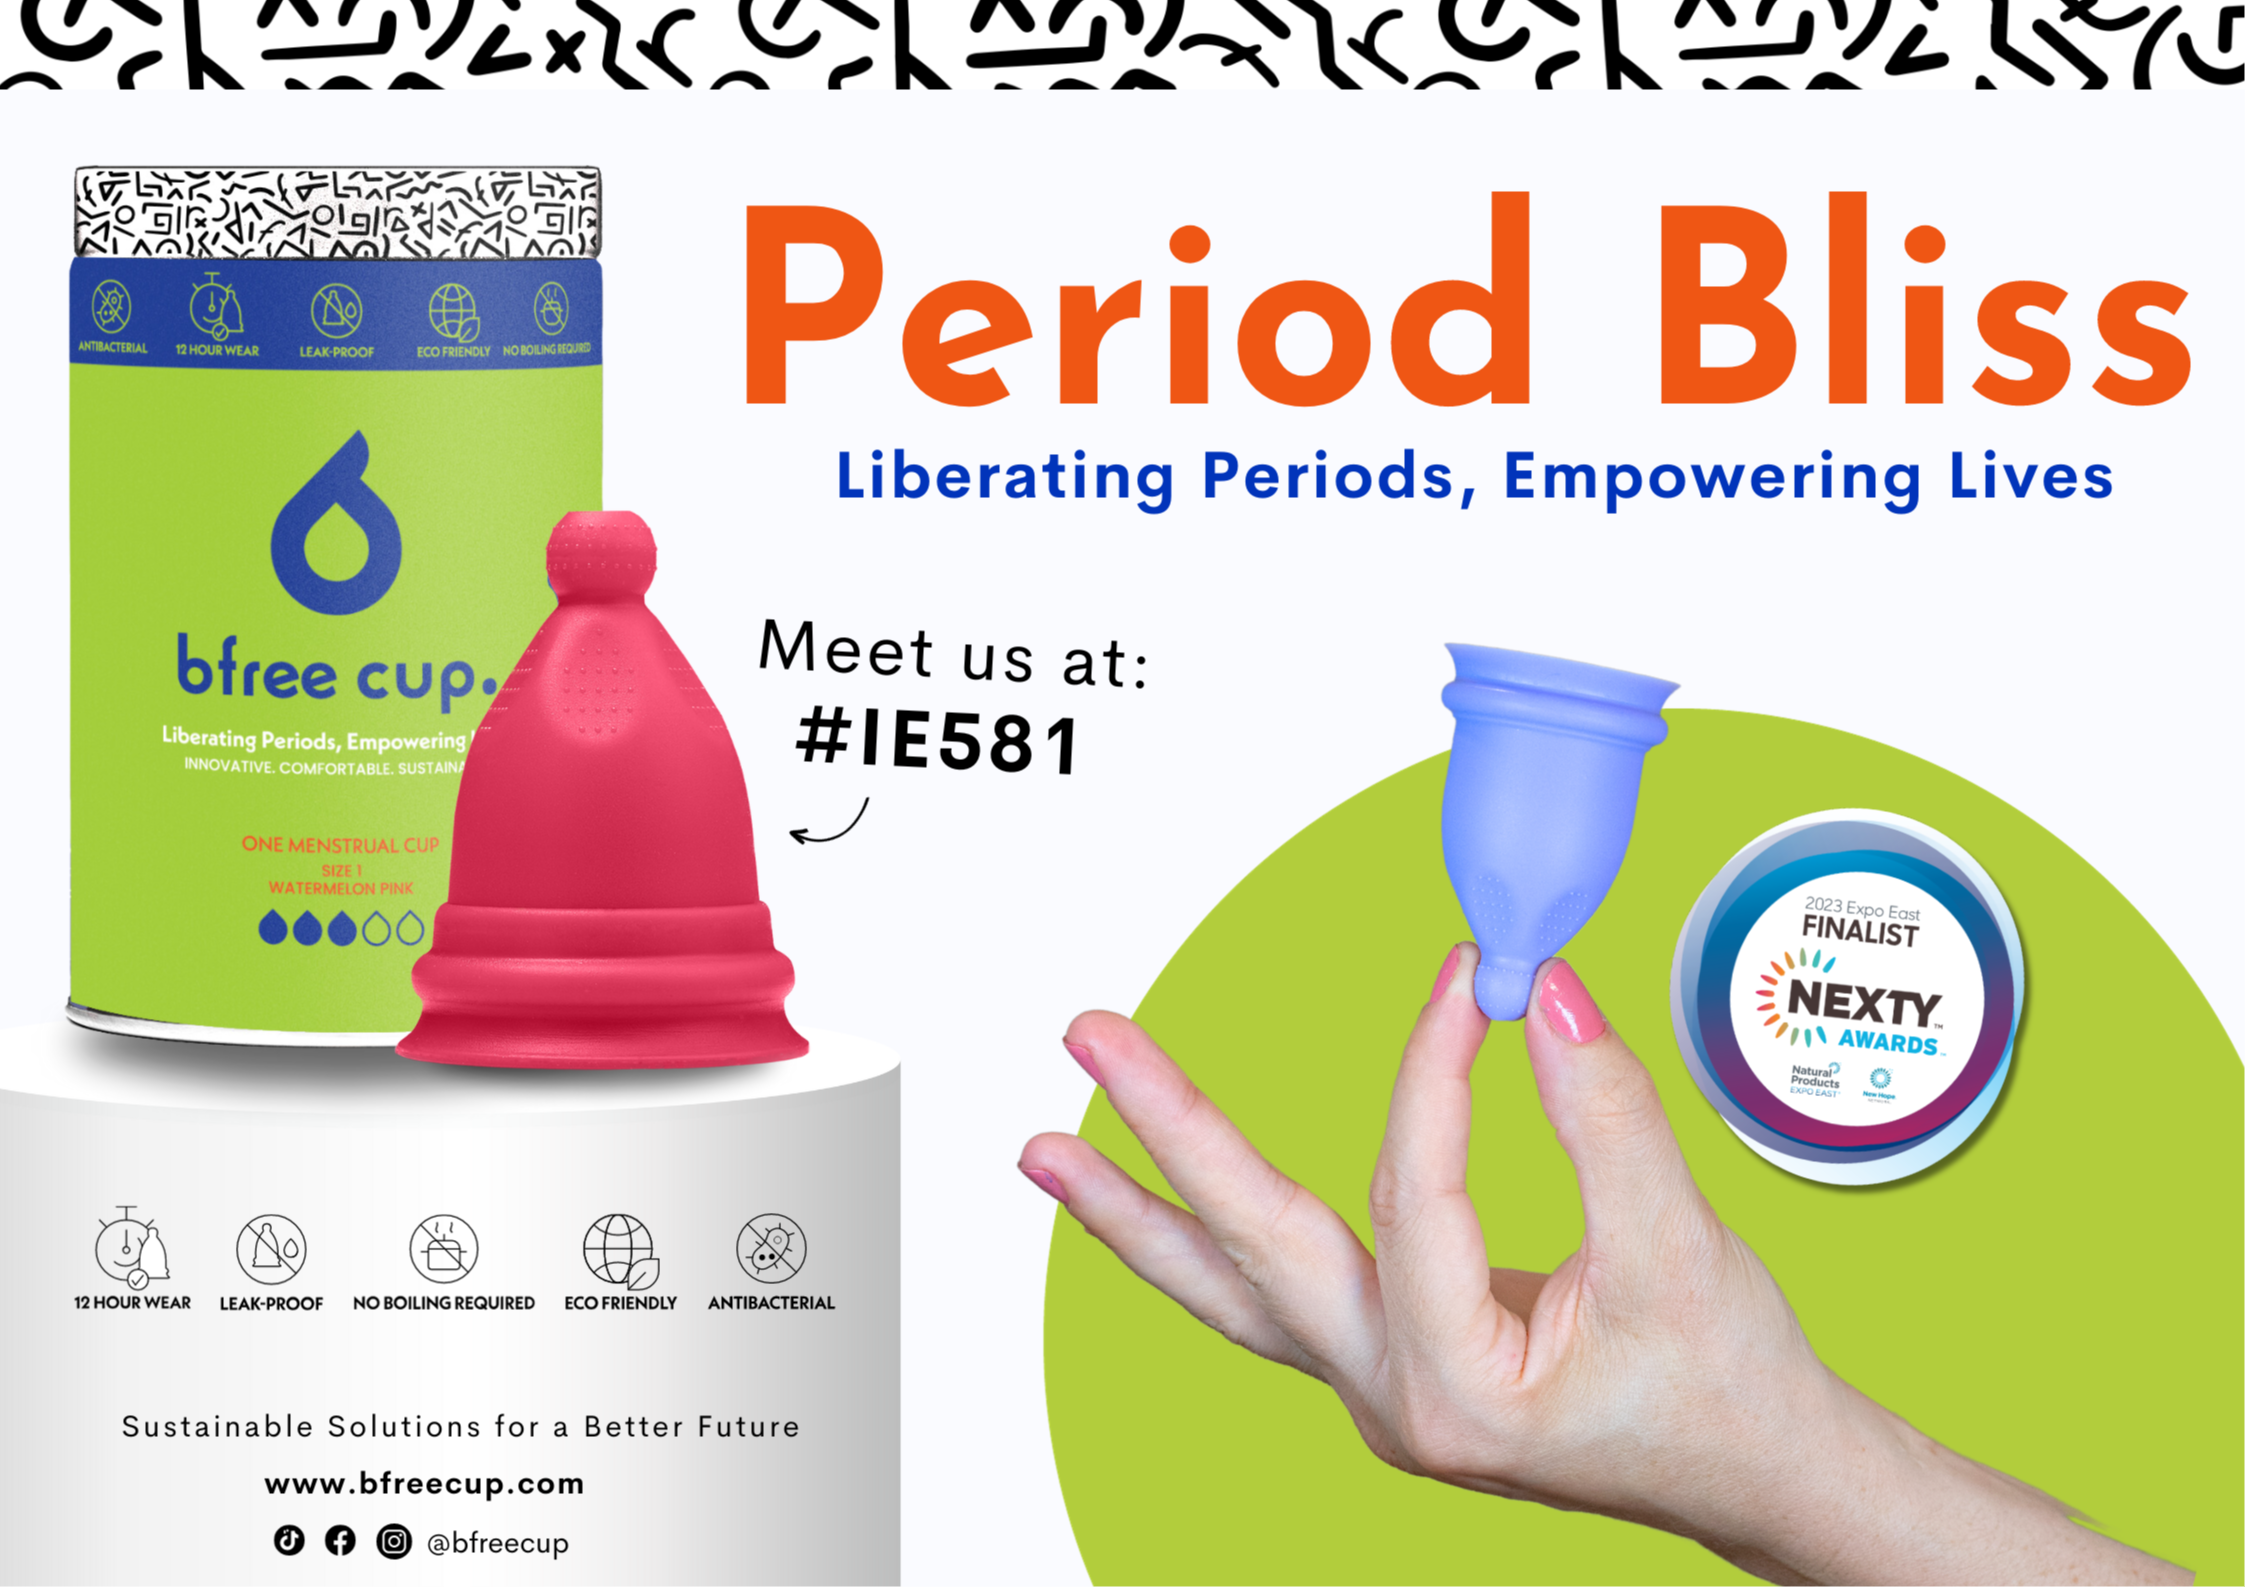 Find Period Bliss with Our Bfree Cup 7706